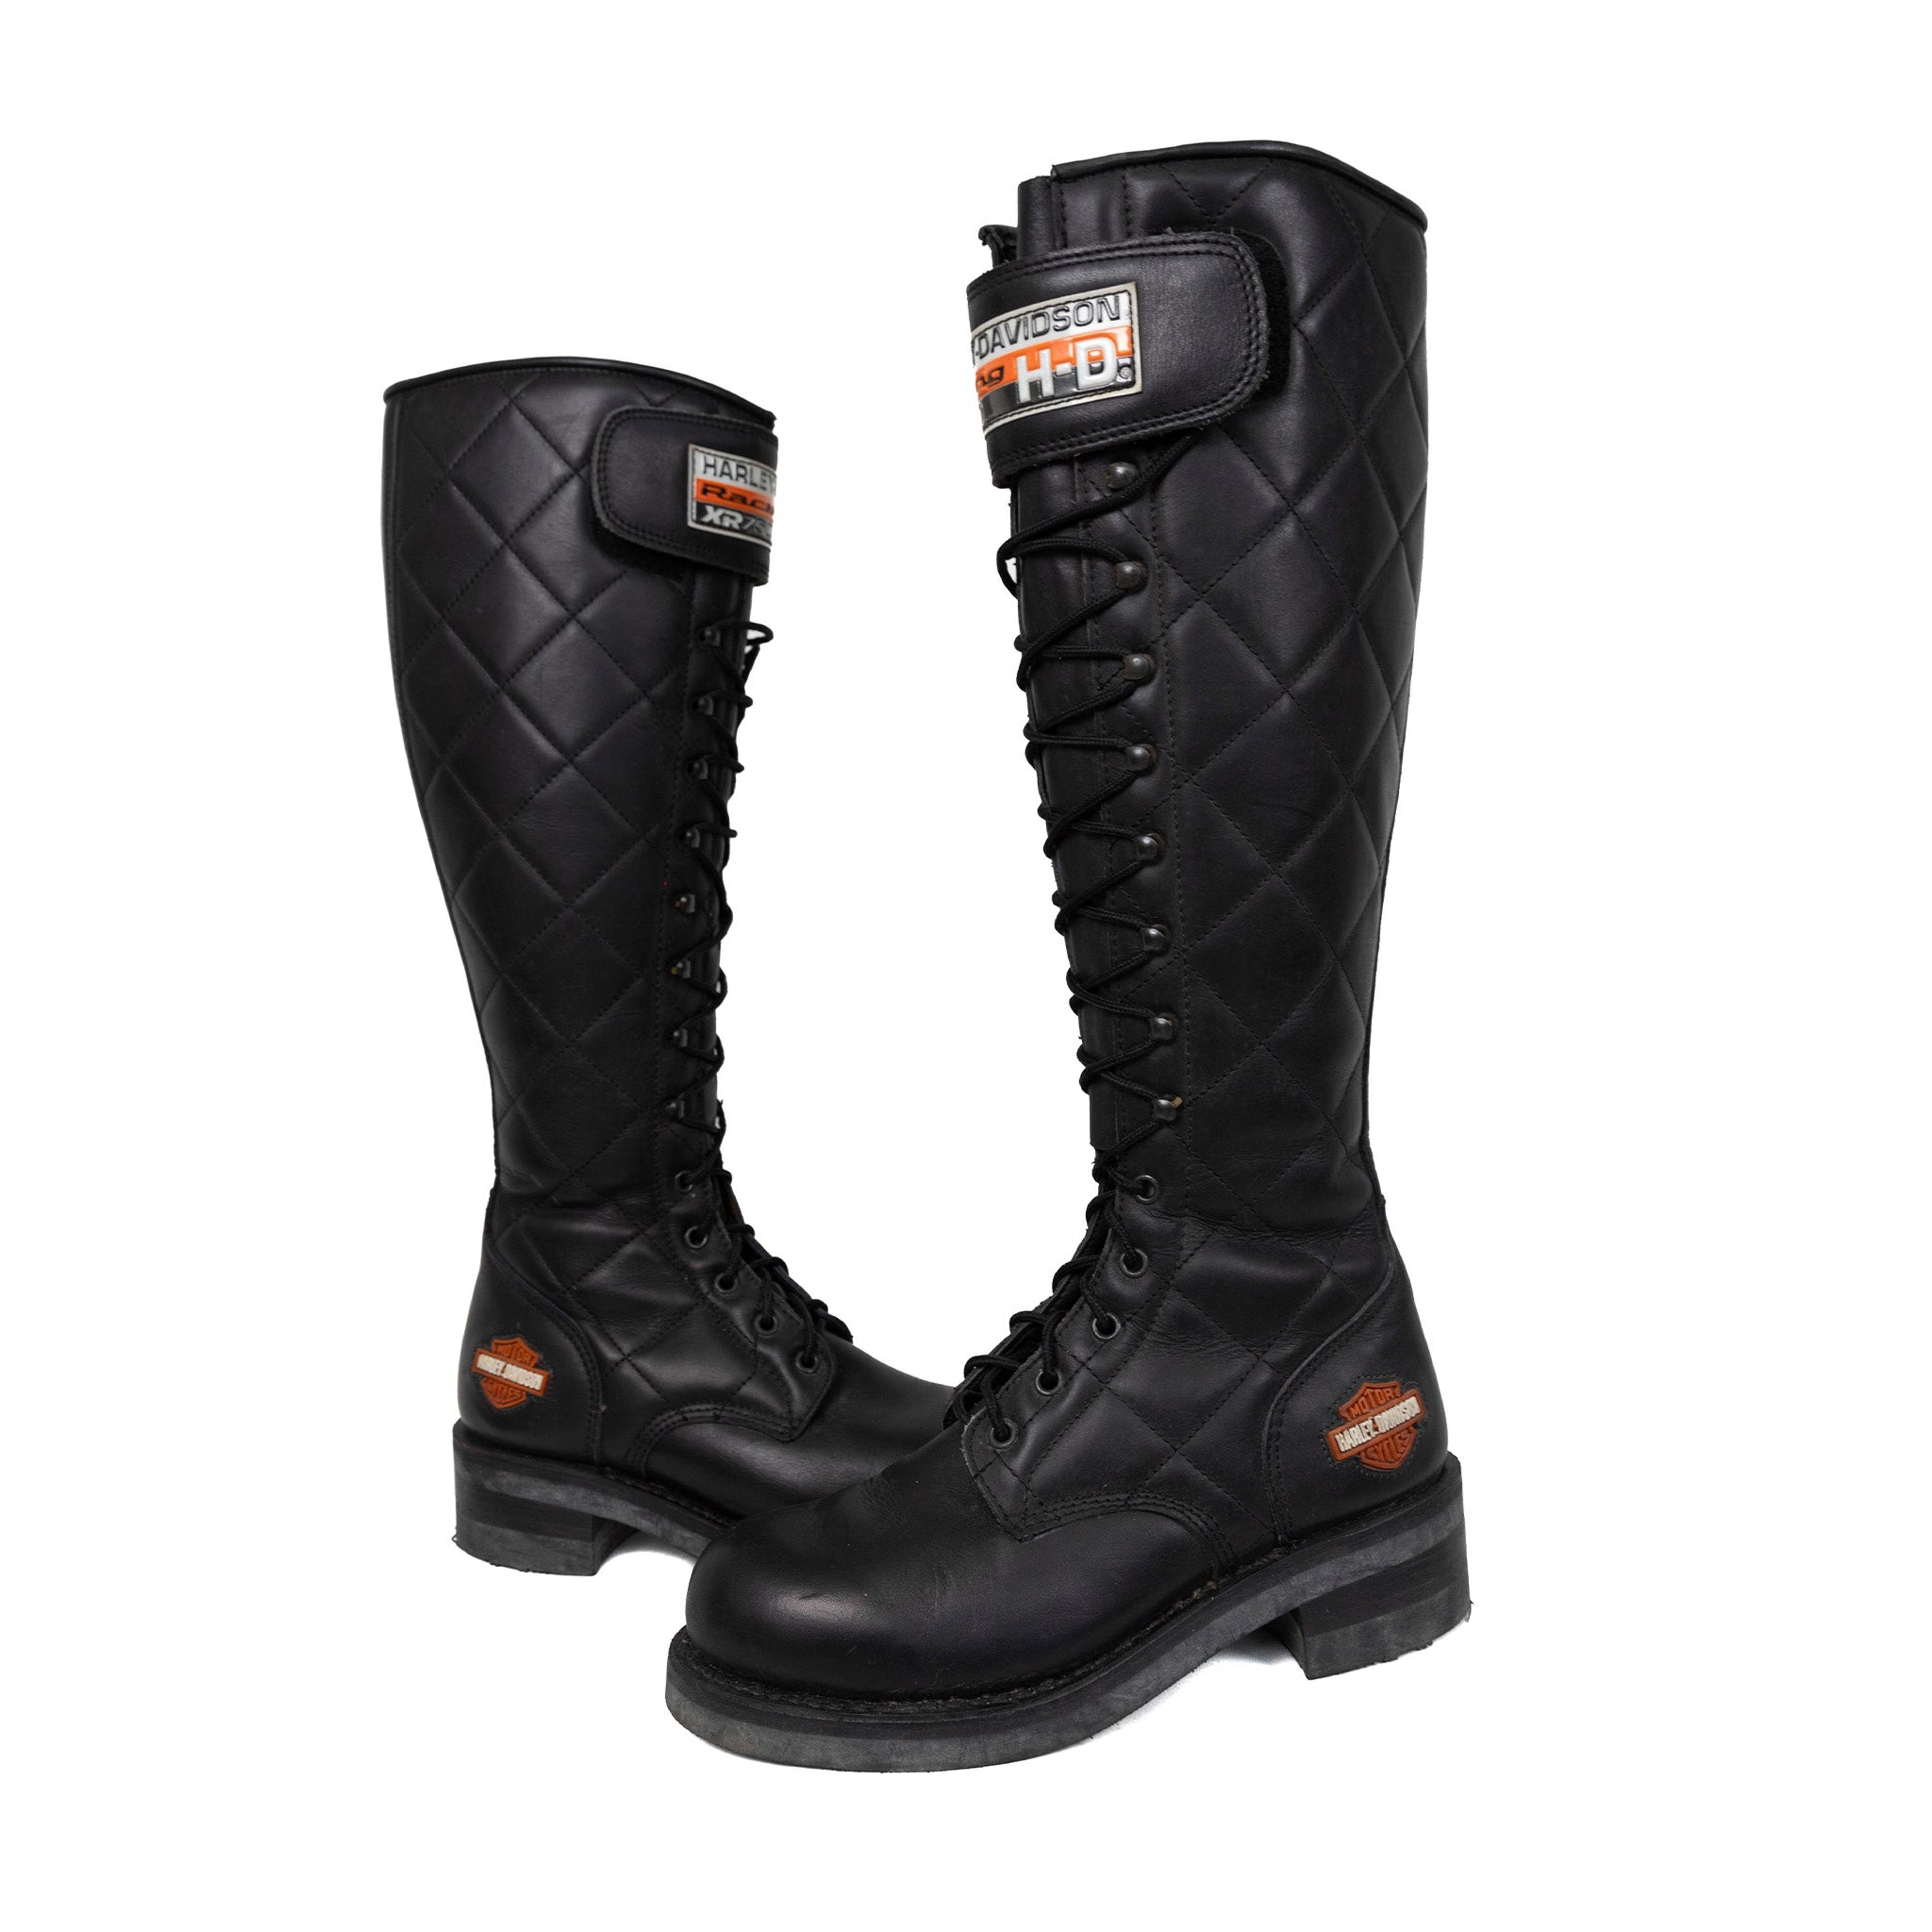 Alternate View 2 of Harley Davidson Racing XR750 Lace Up Biker Boots